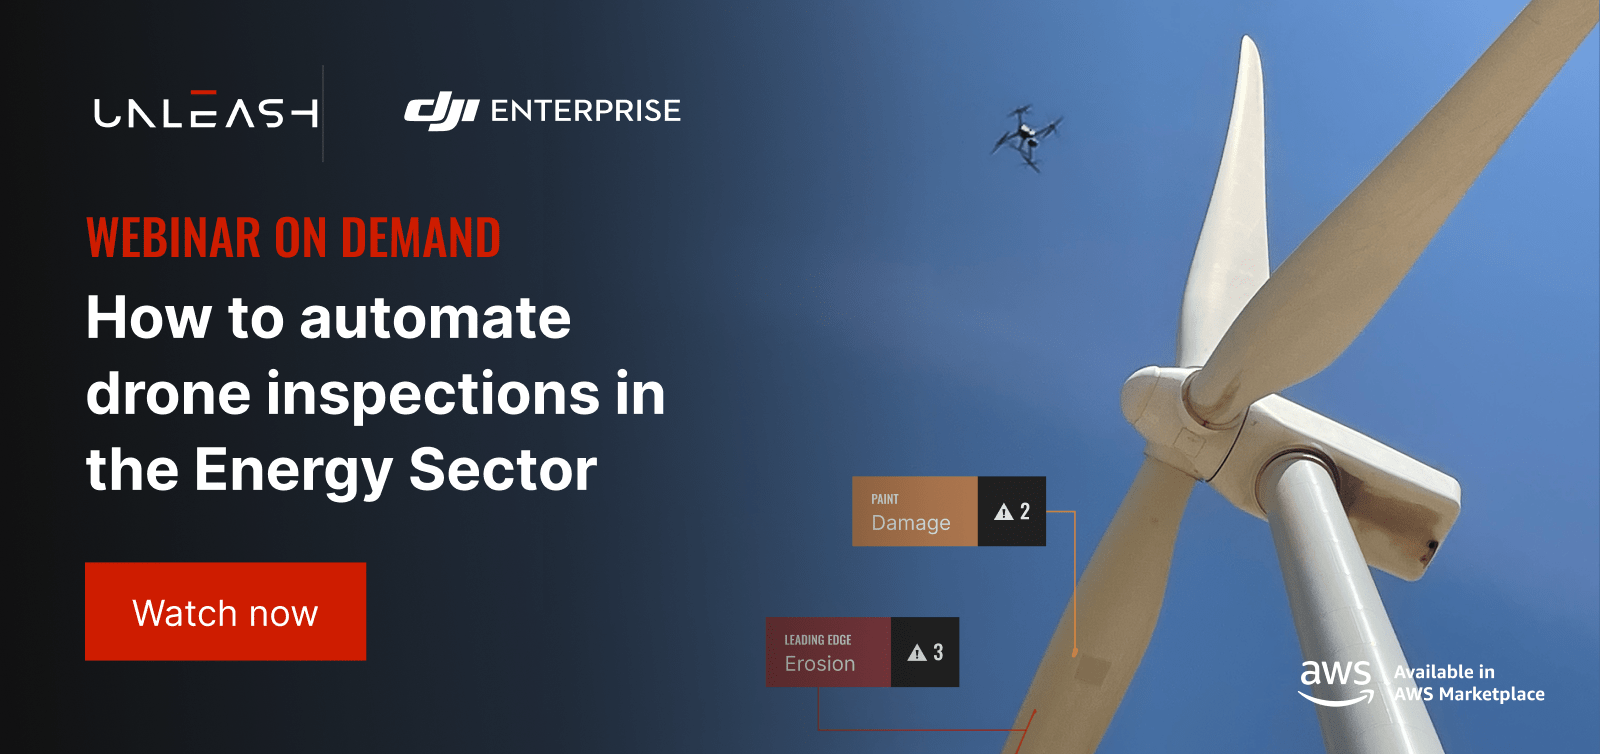 Read full post: Automated Drone Inspections for the Energy Sector - Joint Webinar